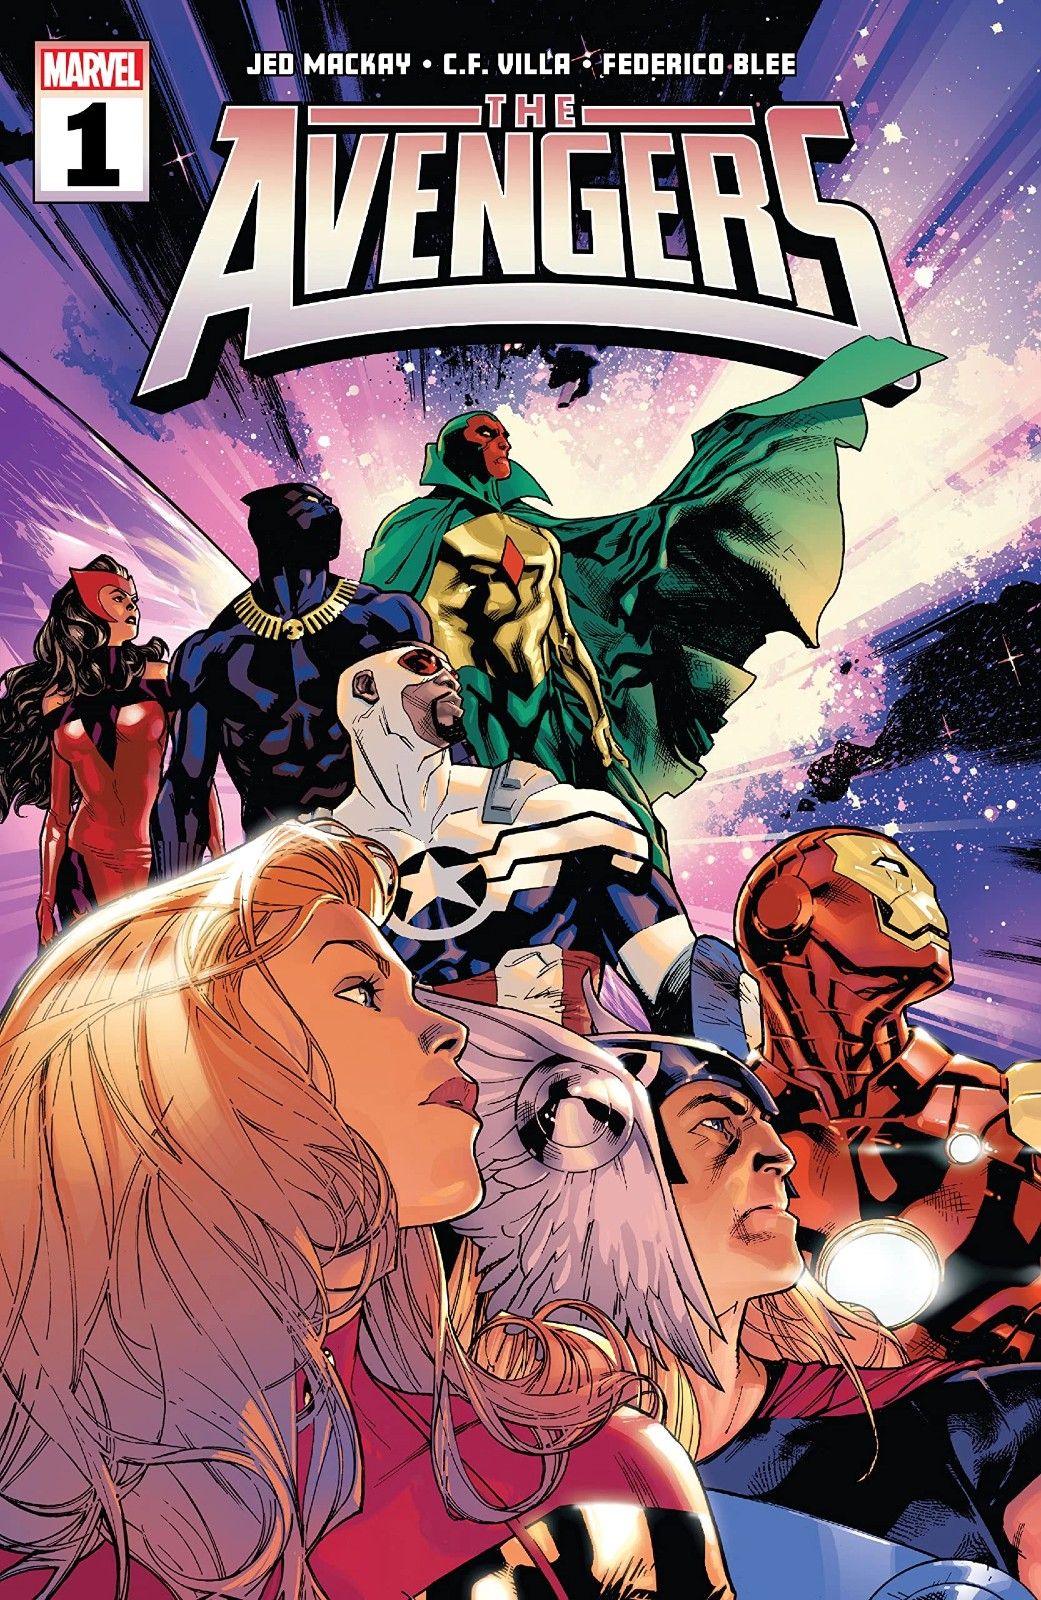 Captain Marvel, Thor, Iron Man, Vision, Black Panther, and Scarlet Witch are in Avengers (Vol. 9) #1 by Marvel